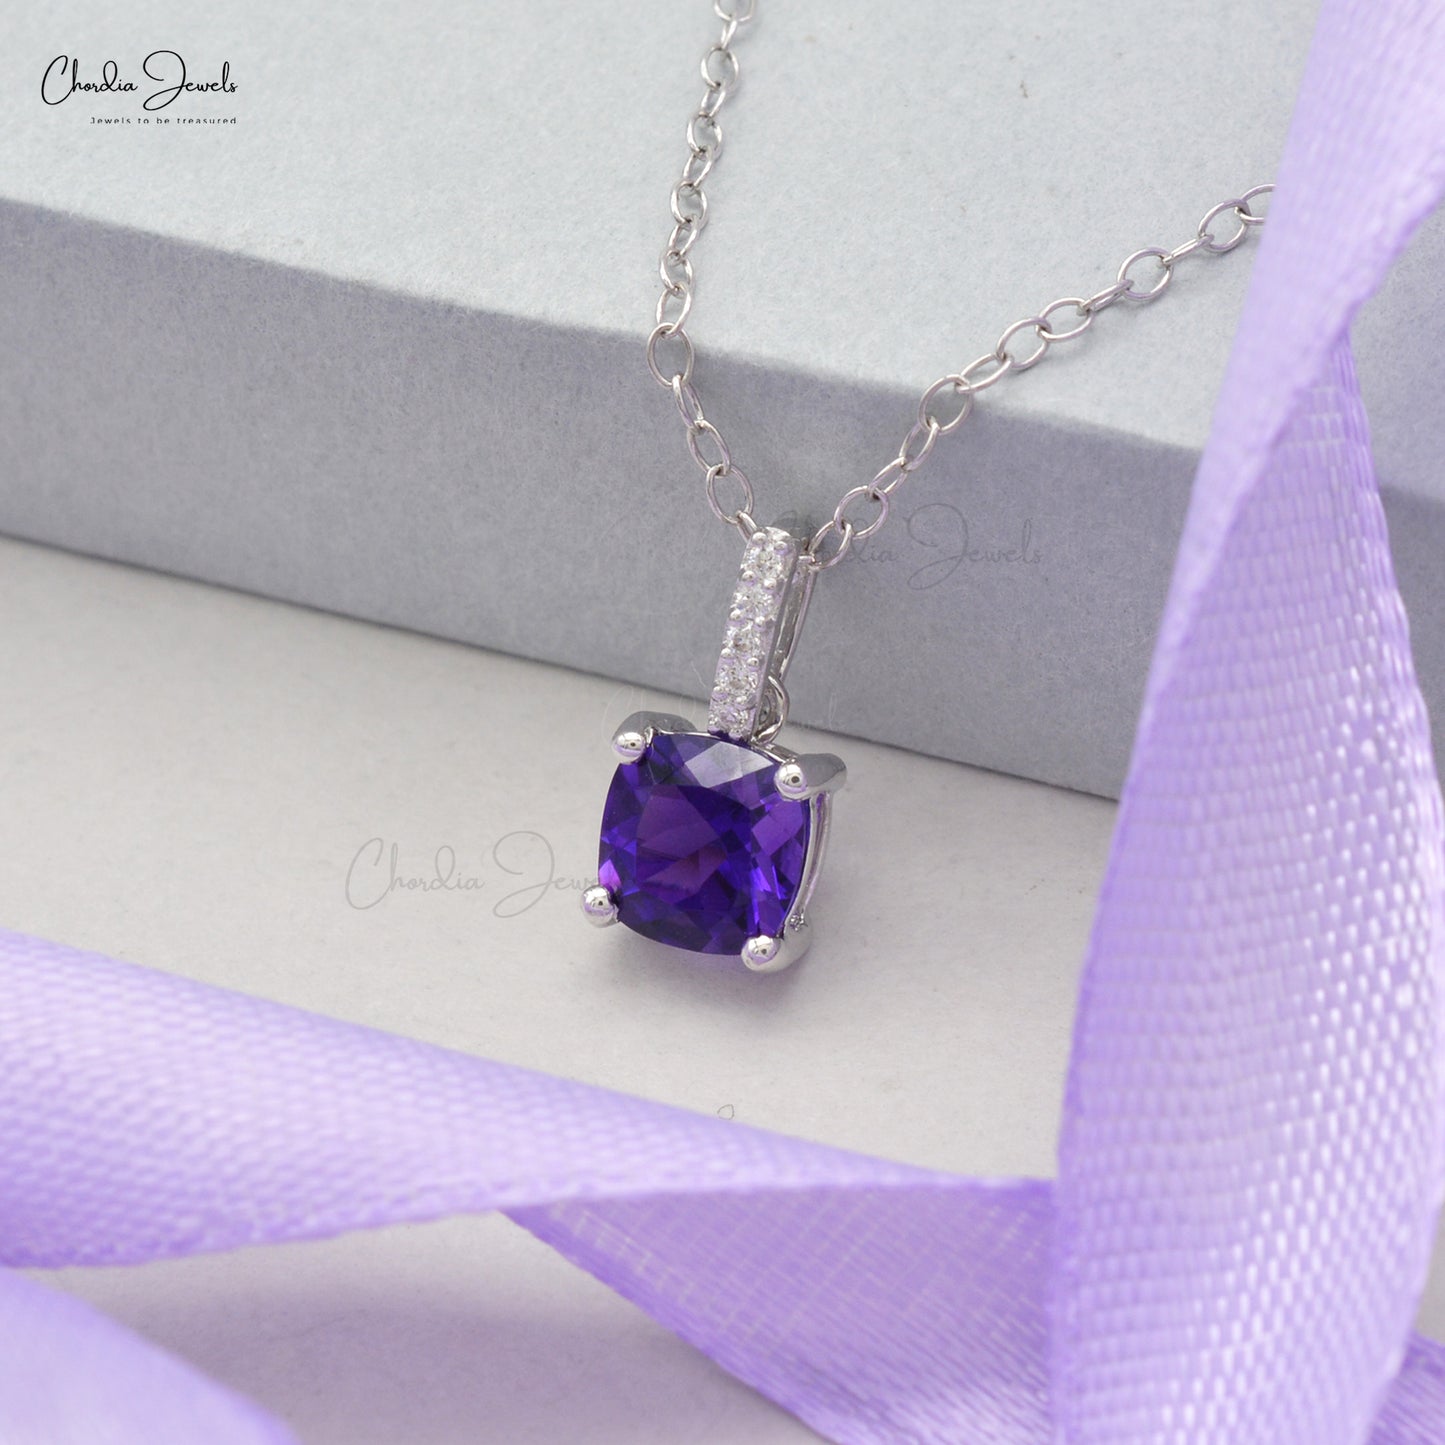 Natural Diamond Dangling Pendant Necklace in 14k Solid White Gold Purple Amethyst Y Chain Necklace For Valentine's Day Gift For Women